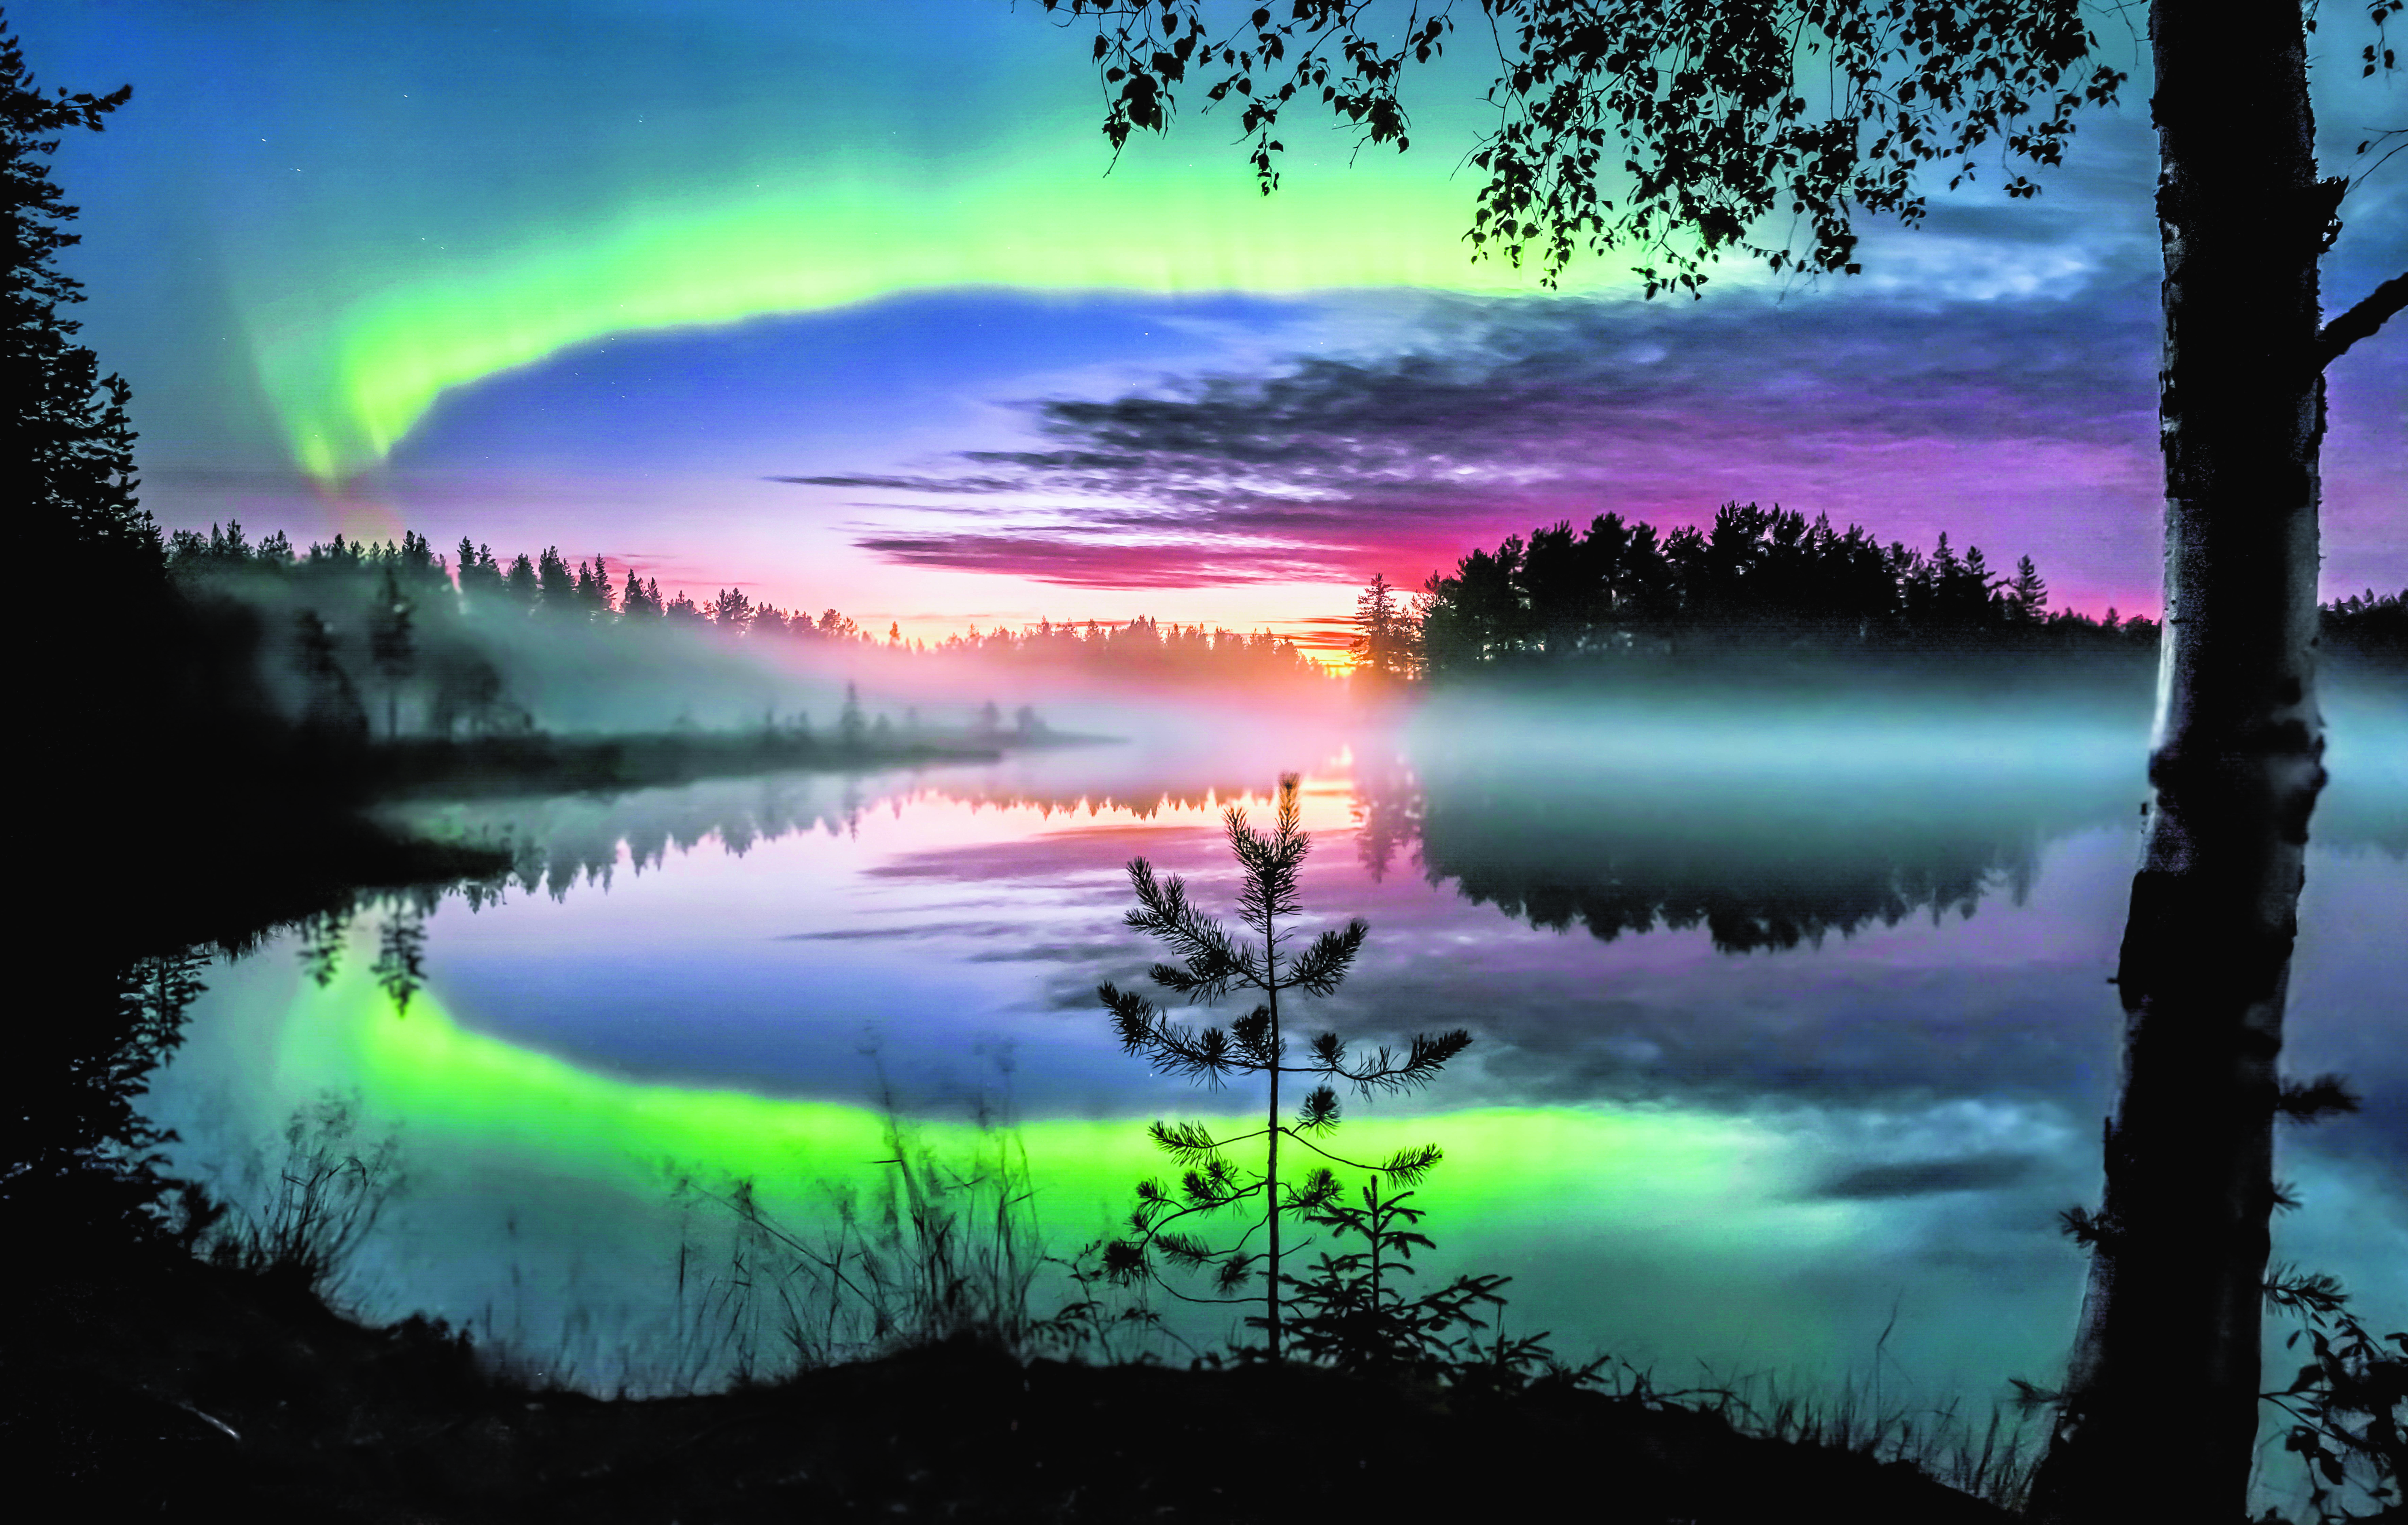 View of a lake at midnight with northern lights in the sky